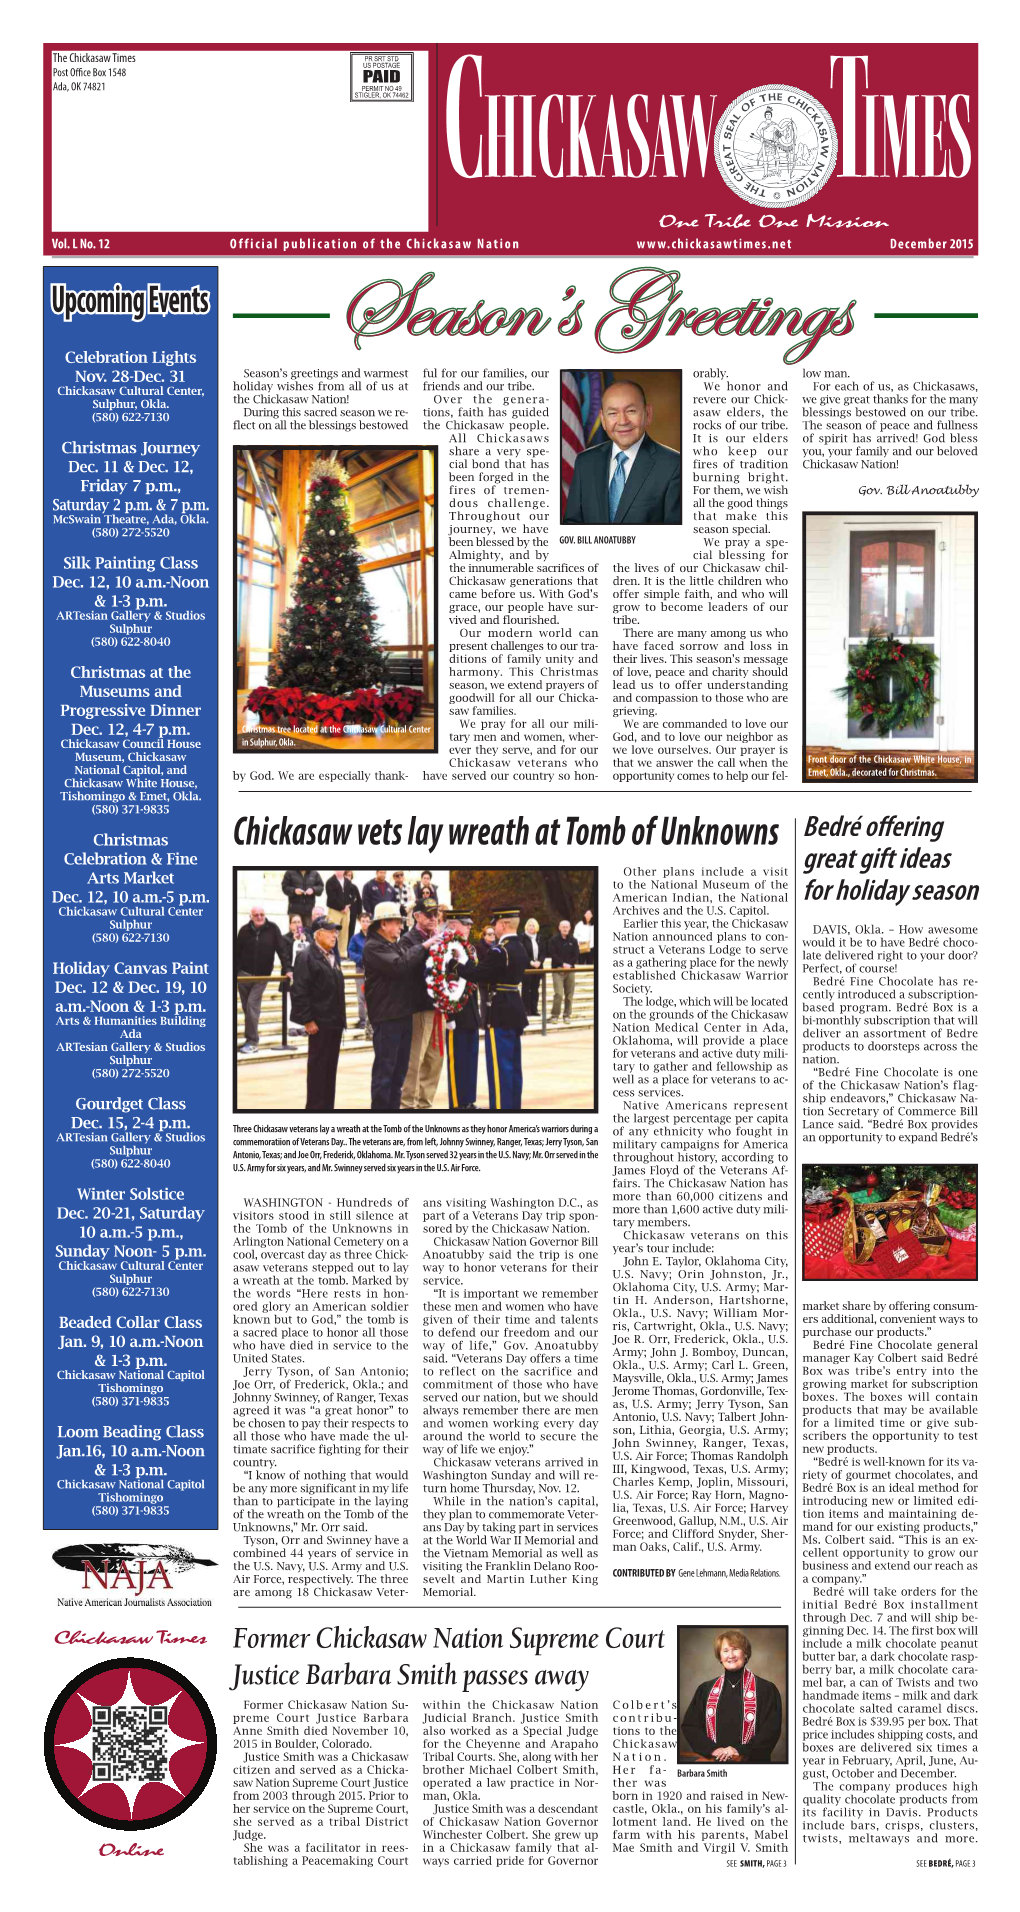 Chickasaw Vets Lay Wreath at Tomb of Unknowns Celebration & Fine Other Plans Include a Visit Great Gift Ideas Arts Market to the National Museum of the Dec